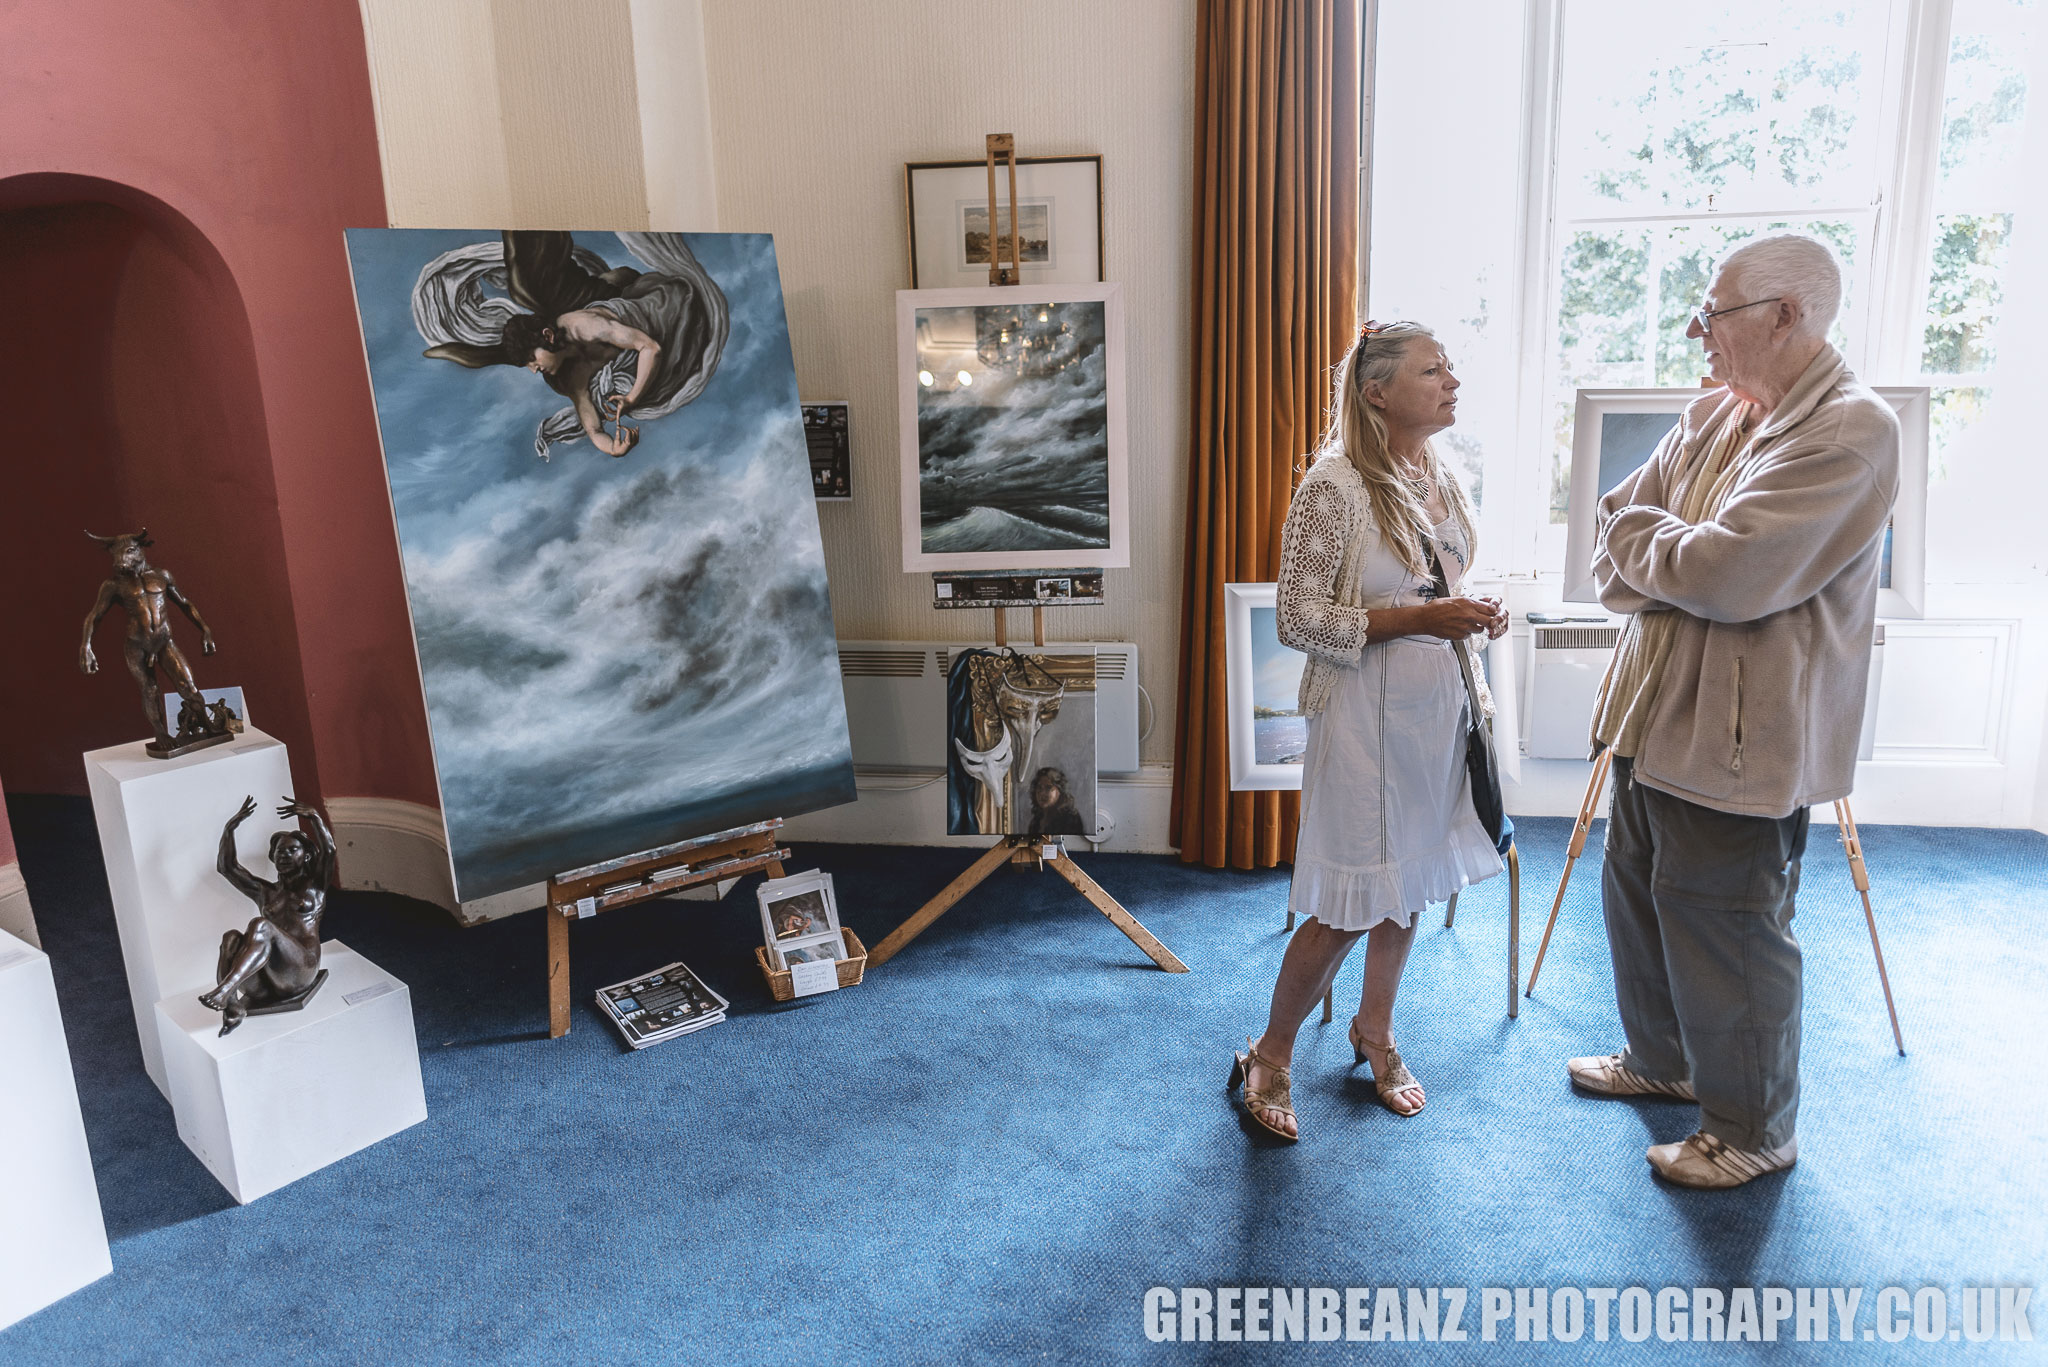 The Reuben Lenkiewicz Art Festival exhibited both local sculpture and paintings